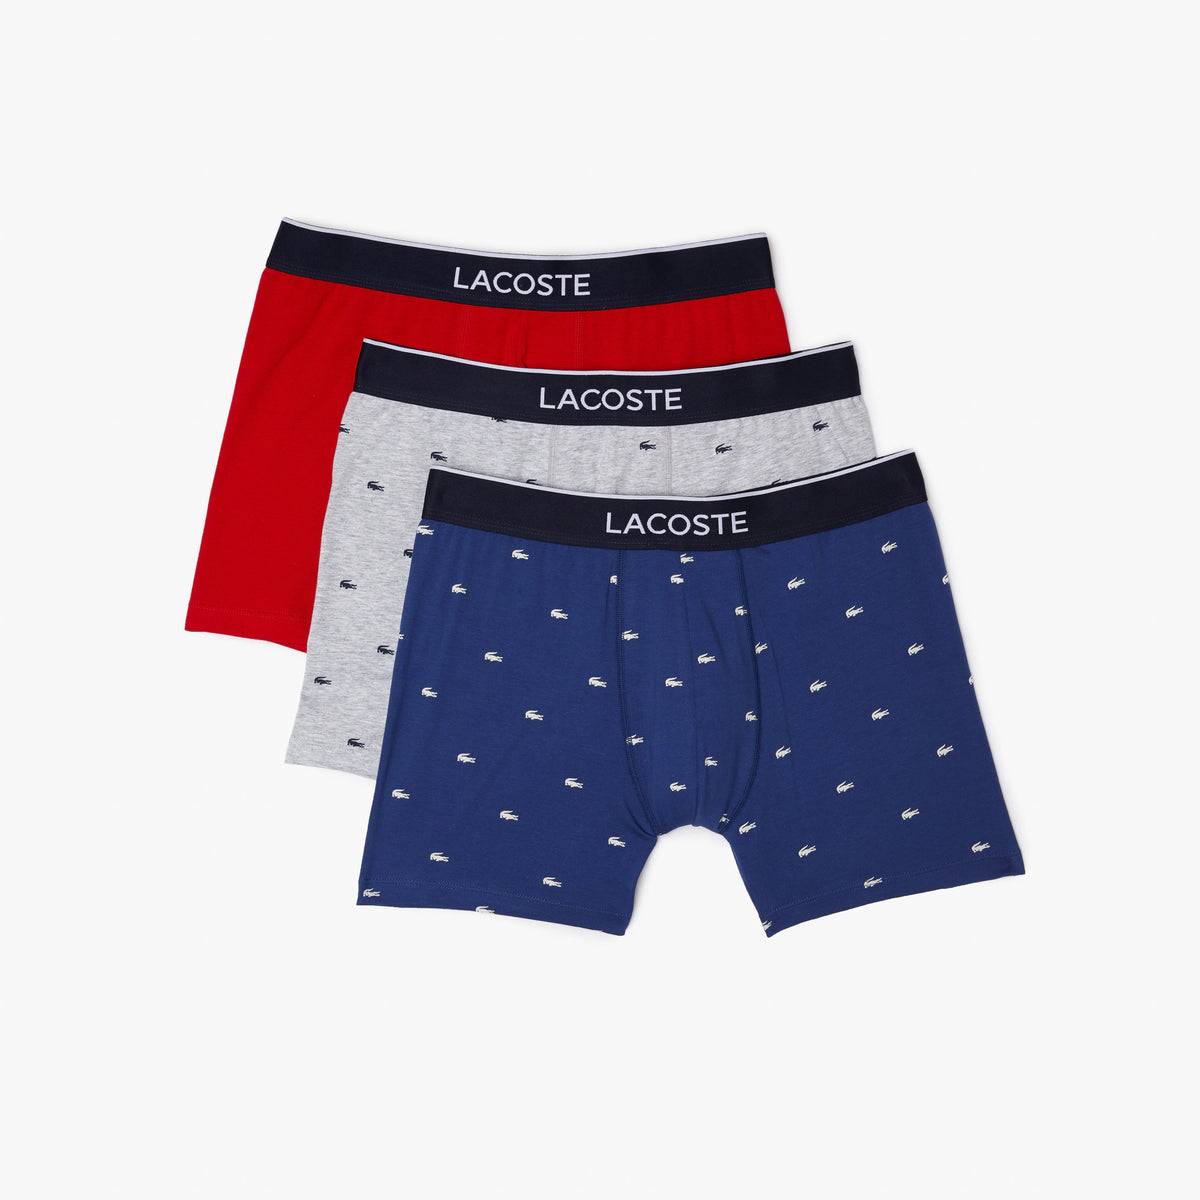 Men’s Branded Waist Long Stretch Cotton Boxer Brief 3-Pack - Navy Blue/Grey Chine/Red